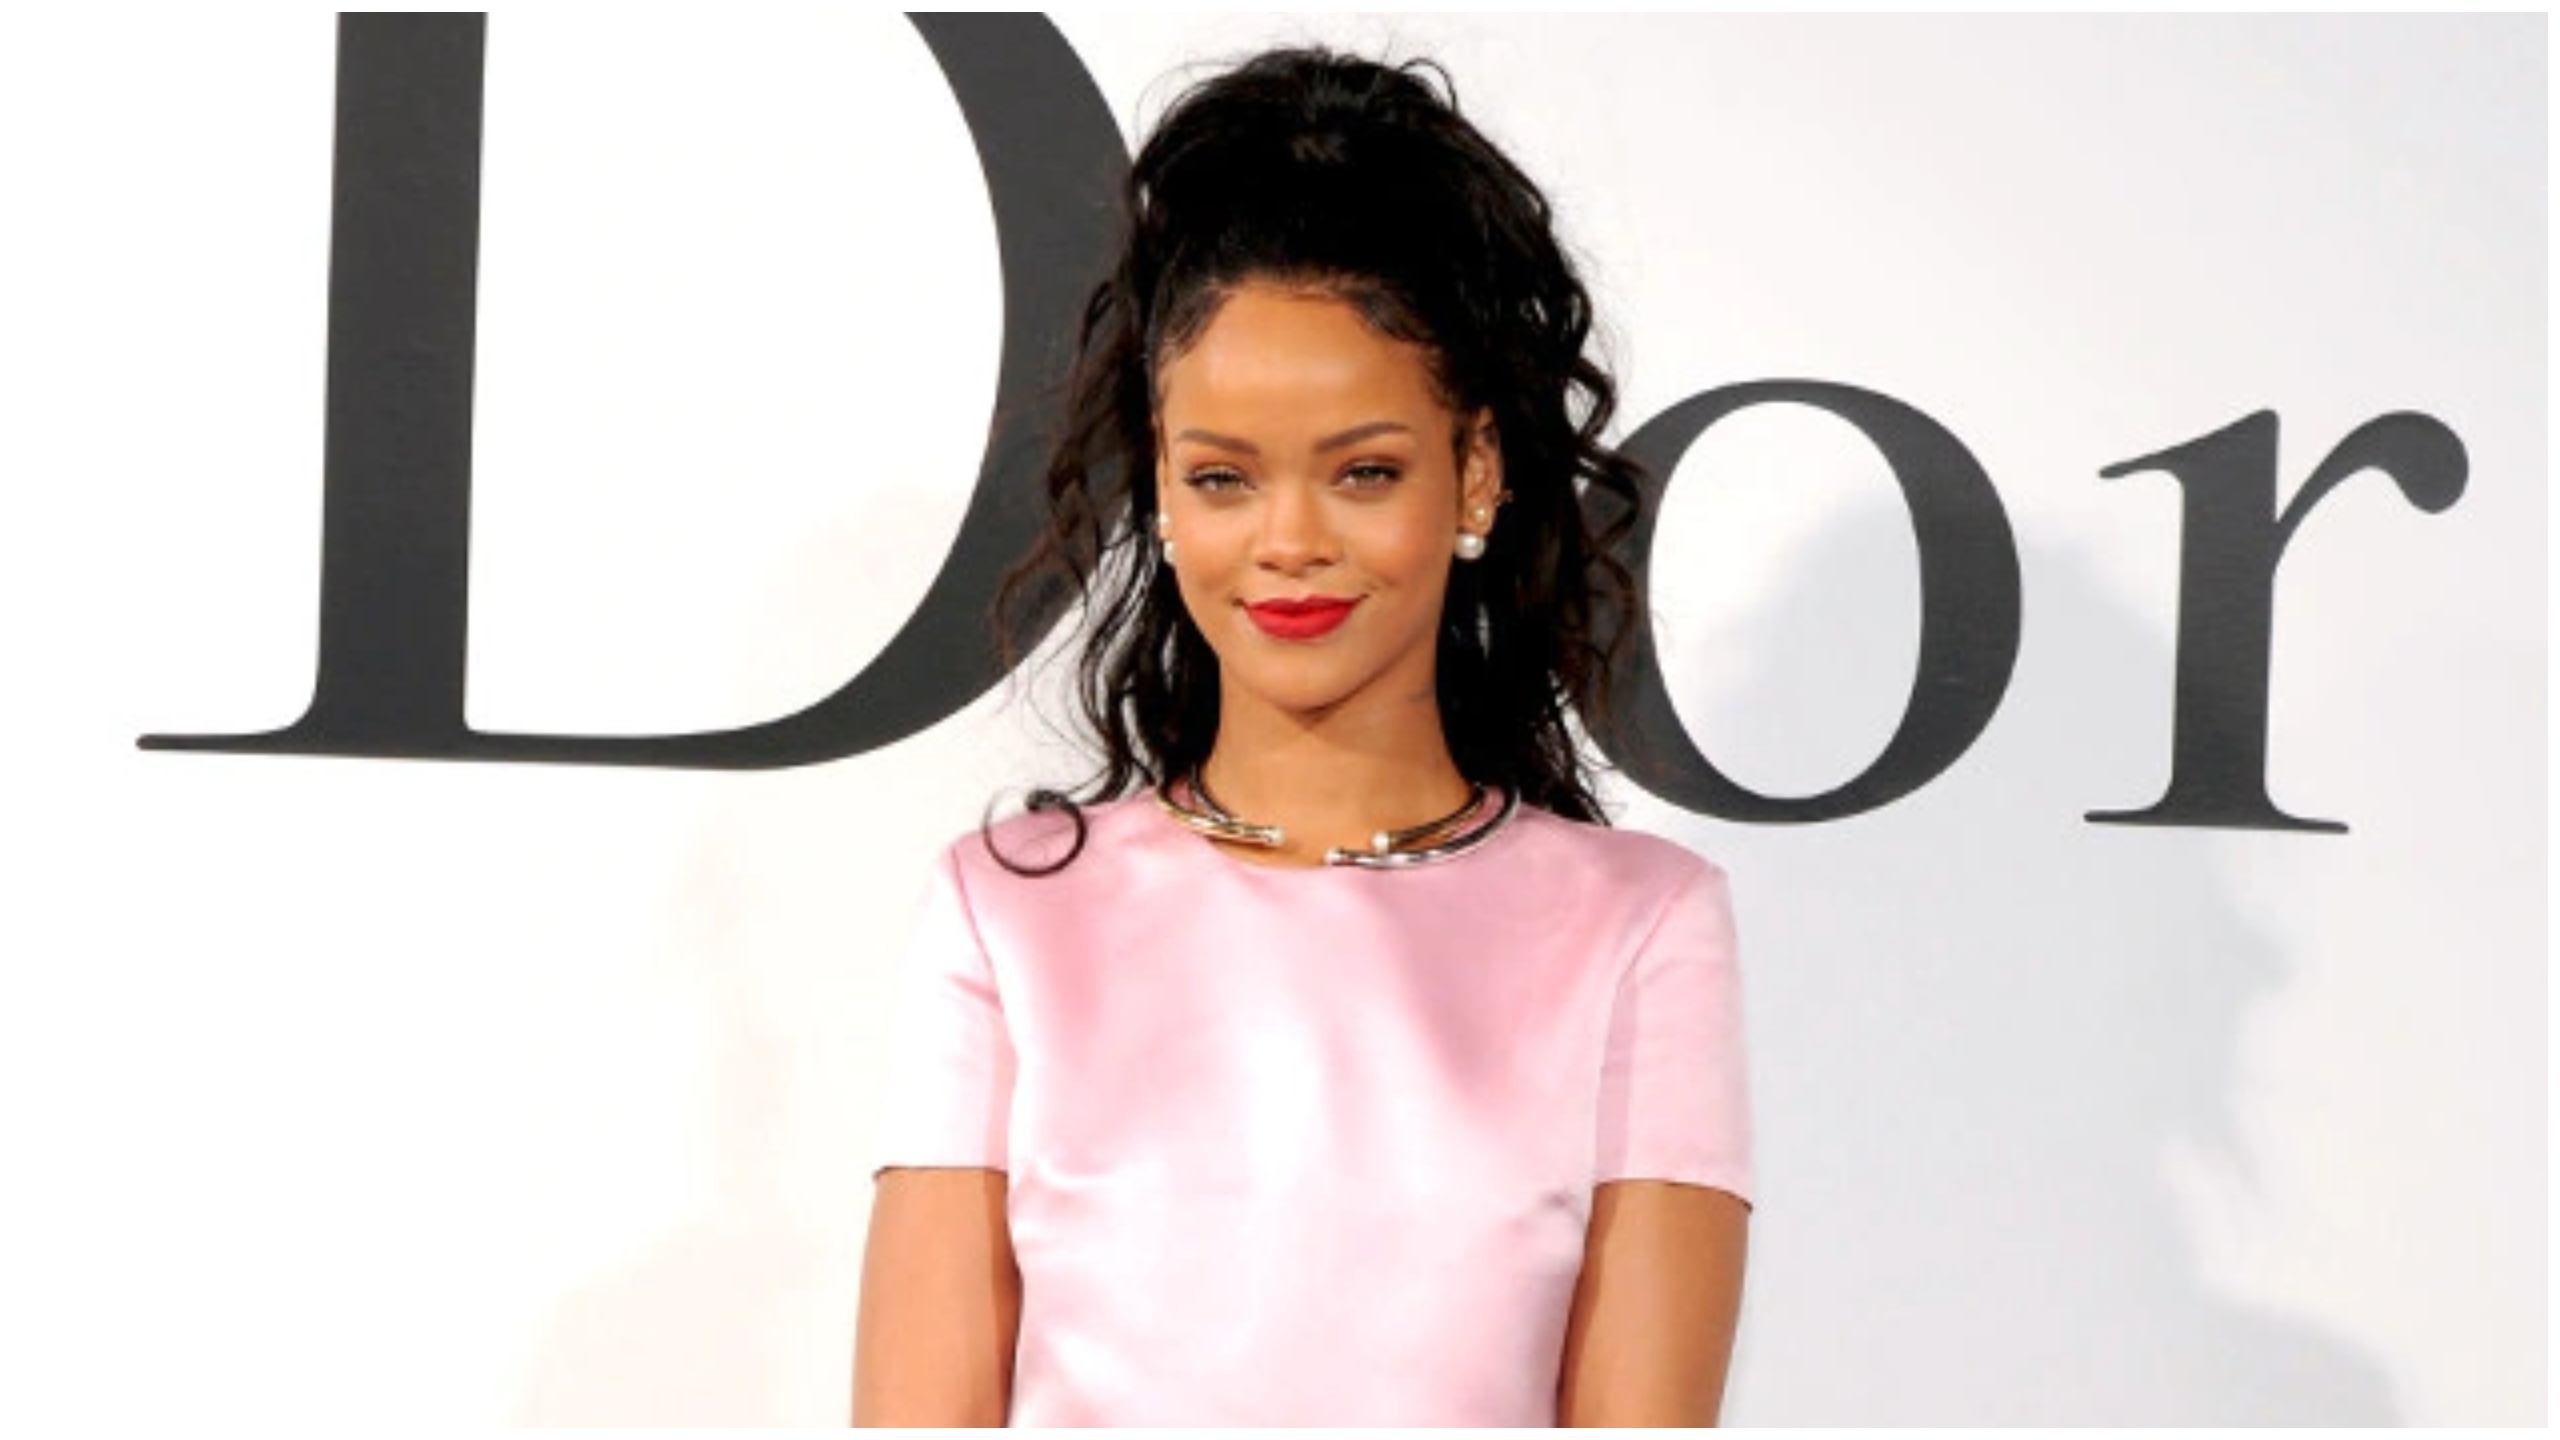 The Unforgettable Day Rihanna Made Fashion History As The First Black Woman To Face Dior